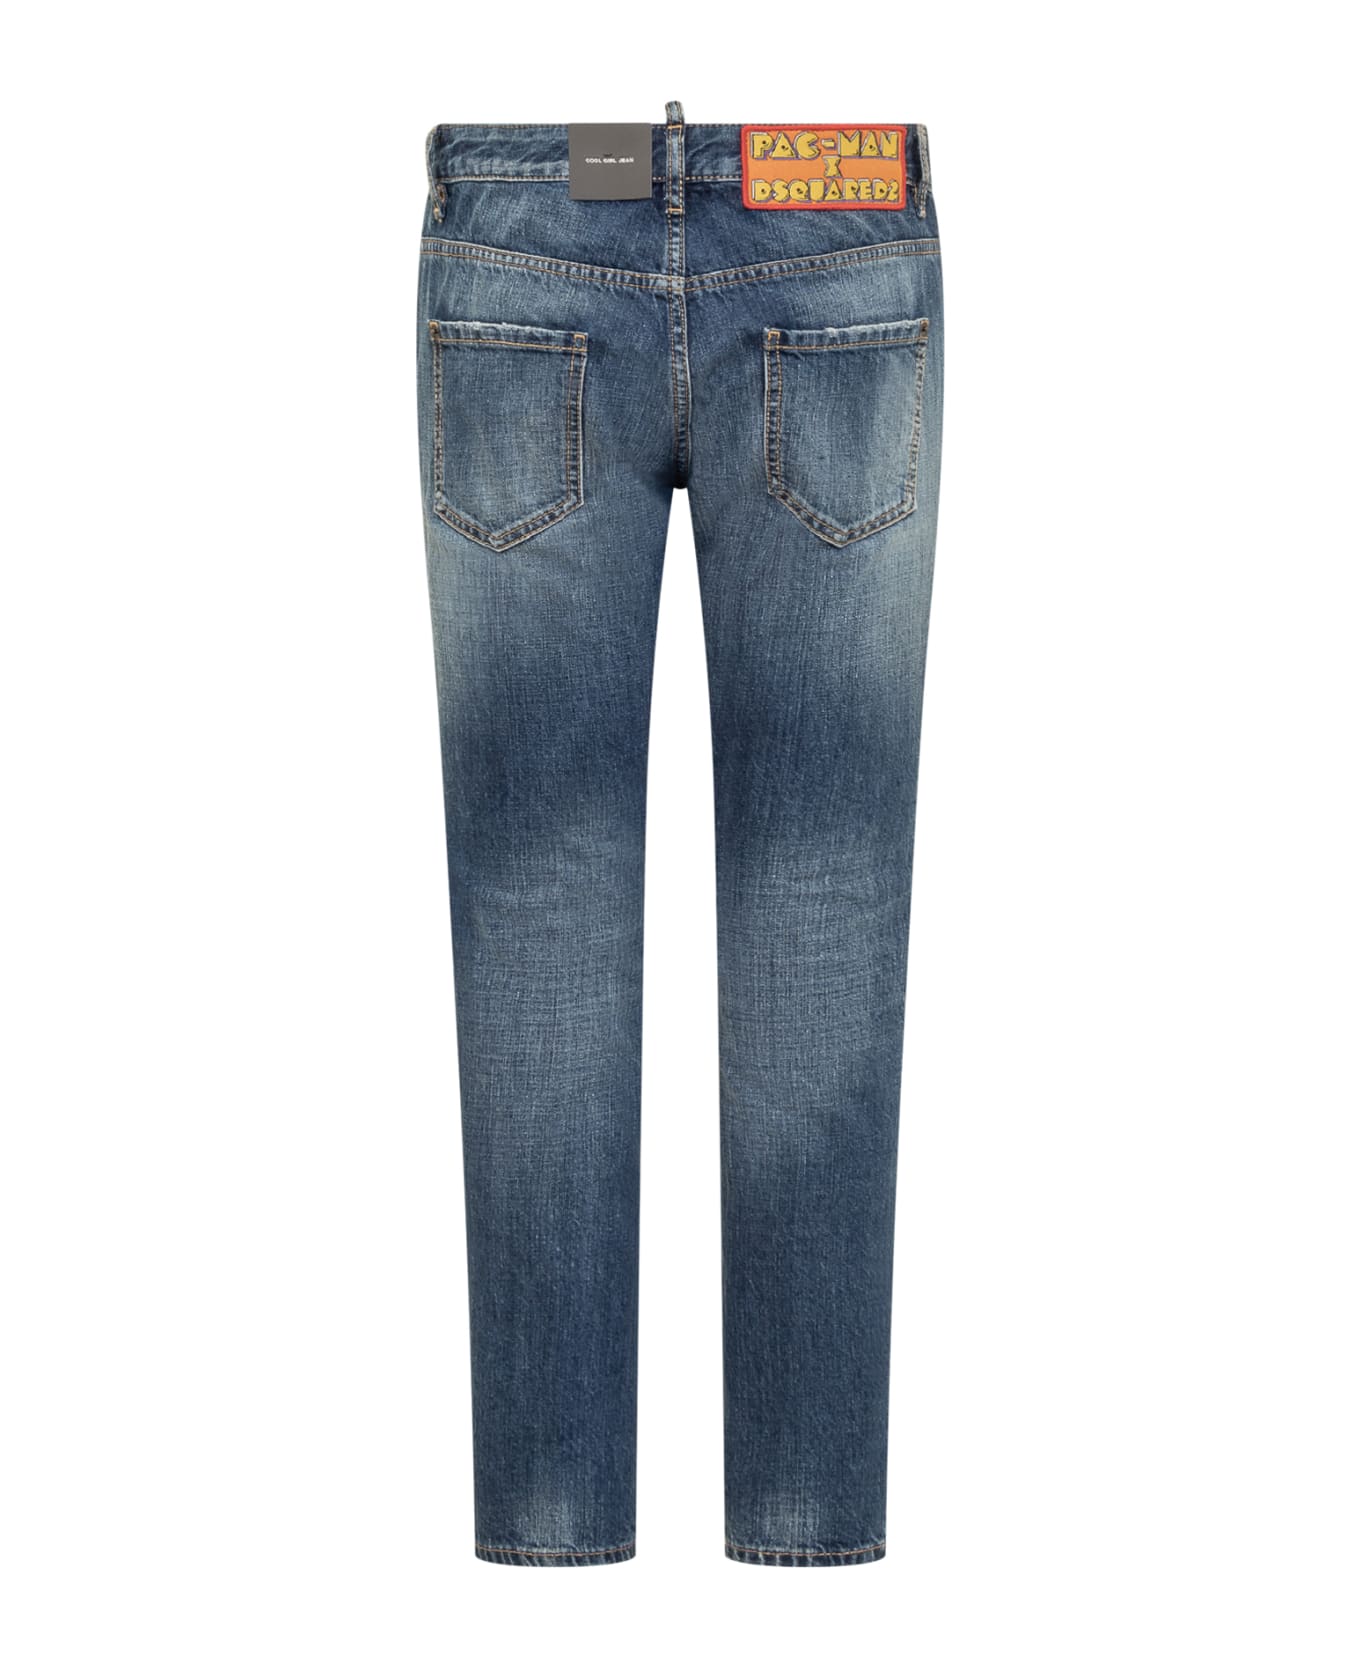 Dsquared2 Pac-man X Dsquared2 Jeans - NAVY BLUE デニム